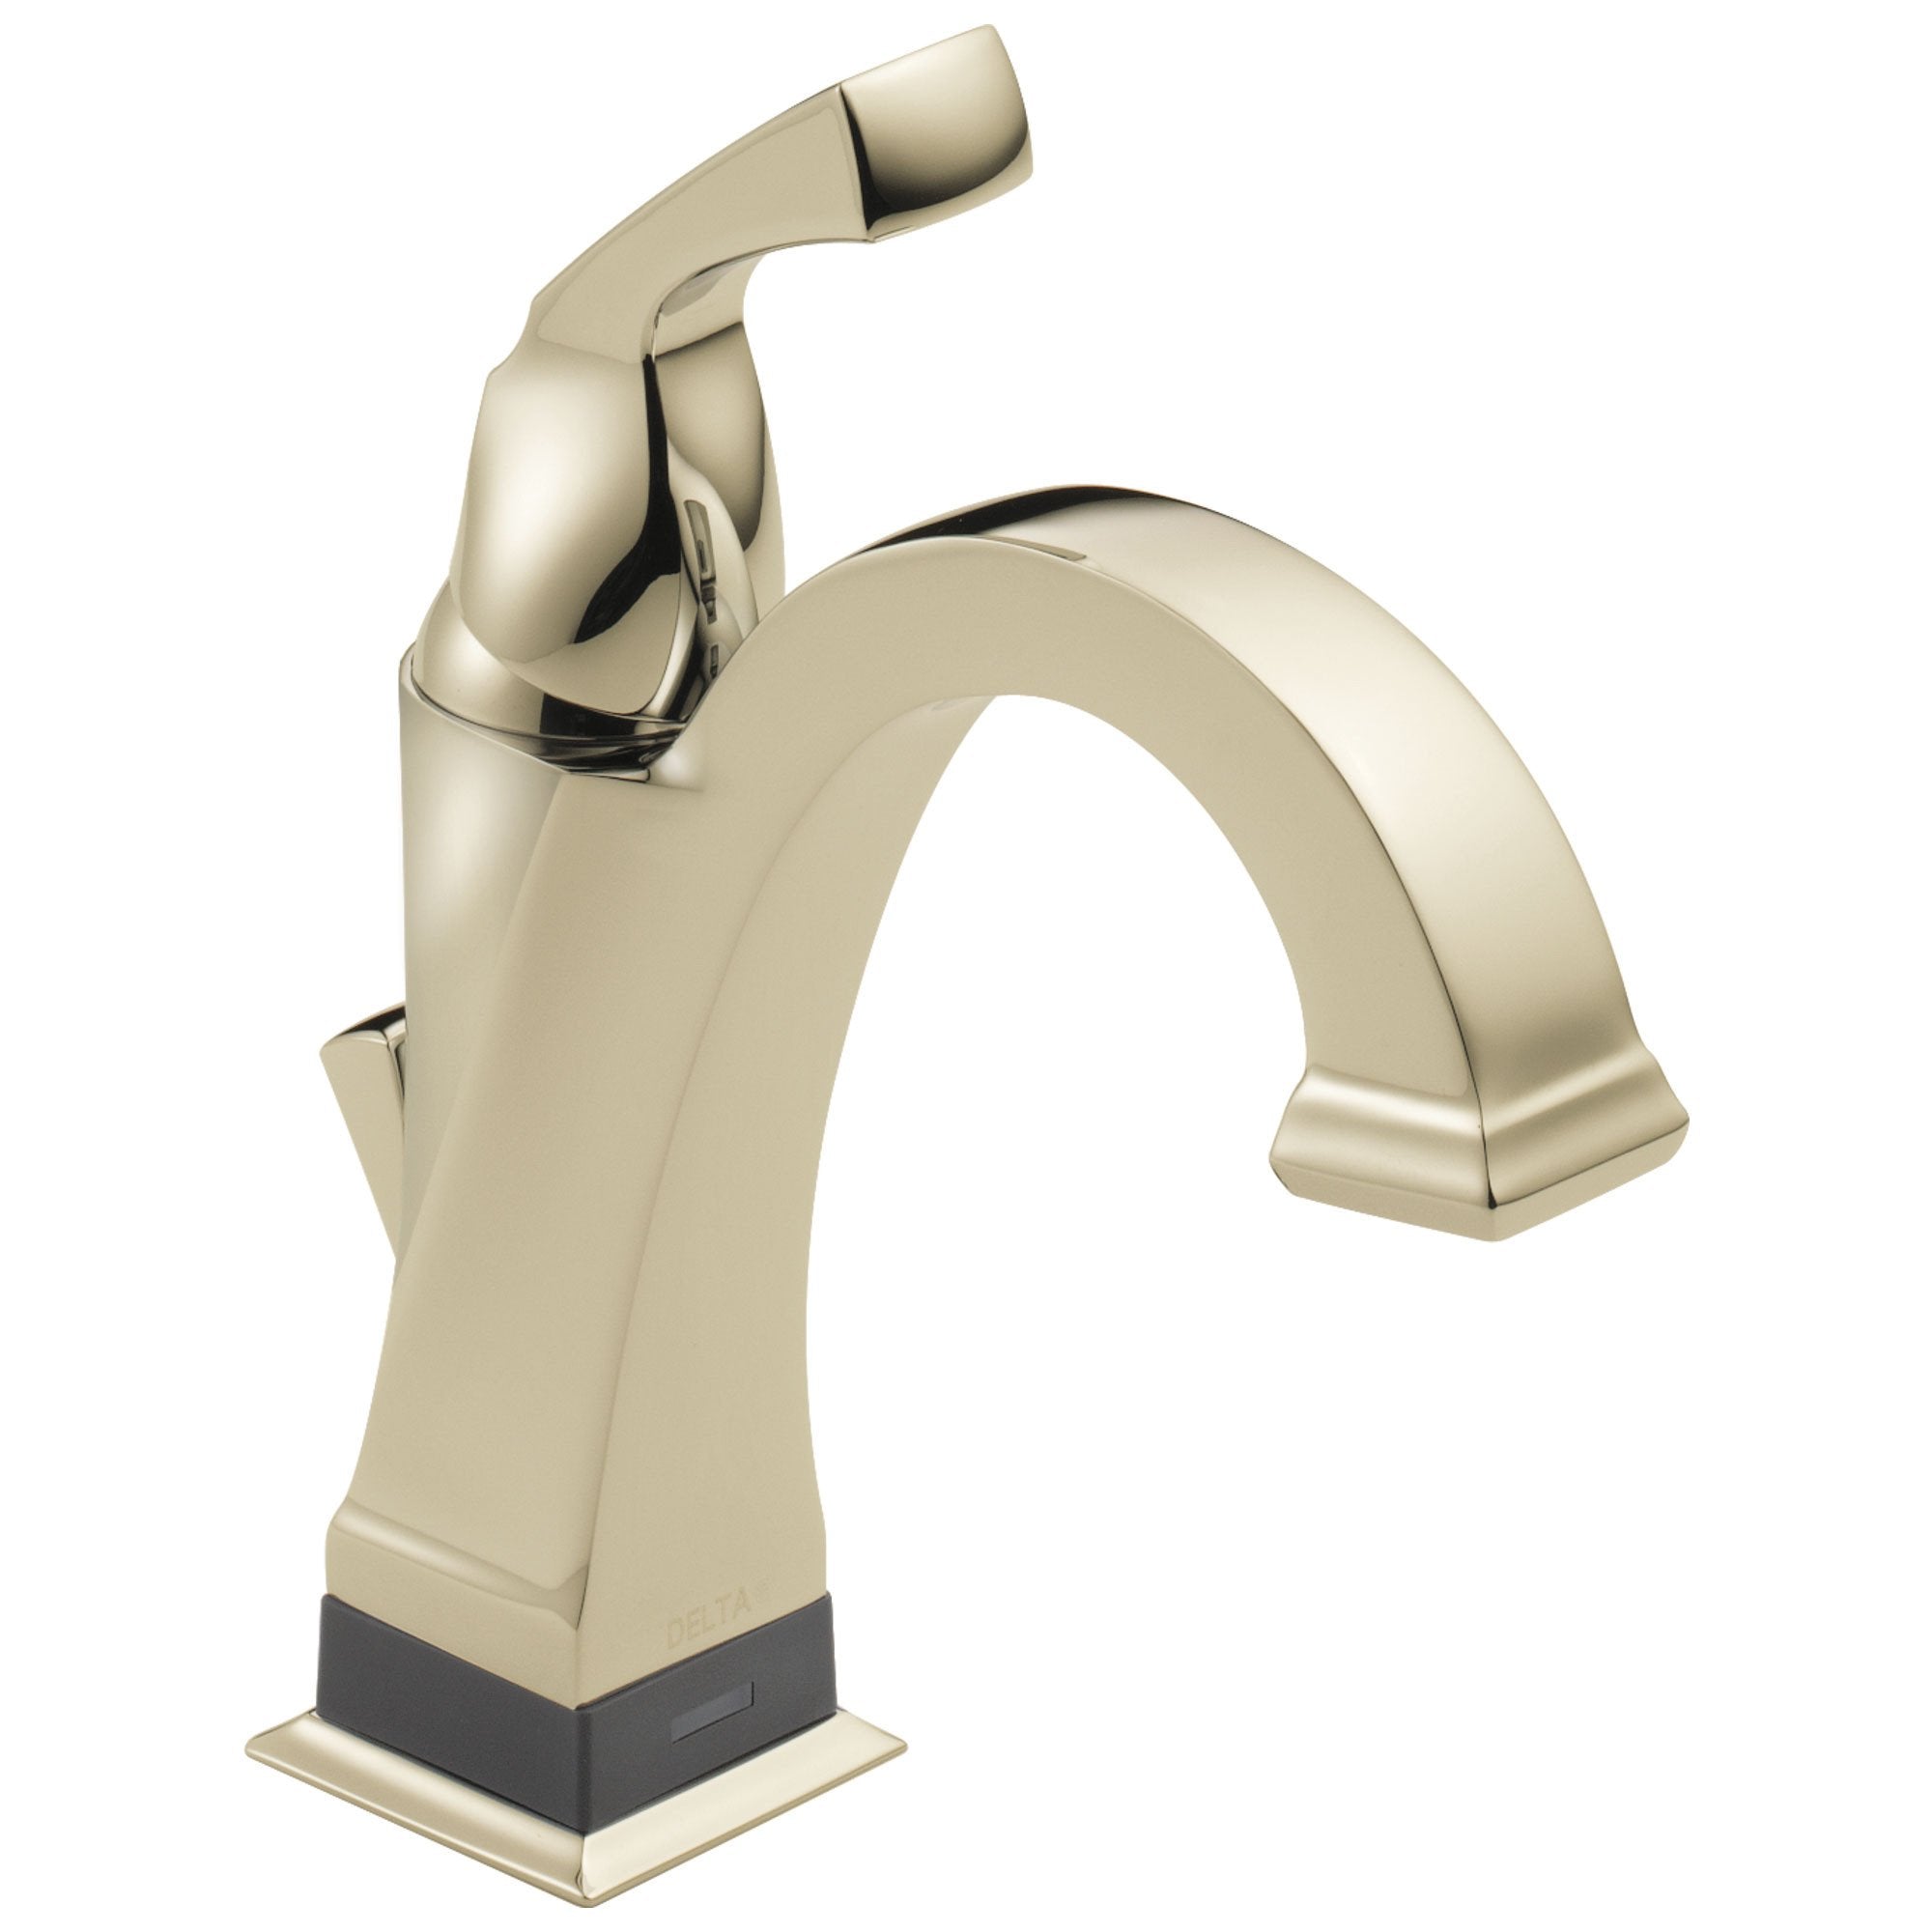 Delta Dryden Collection Polished Nickel Finish Electronic Single Handle Bathroom Sink Faucet with Touch2Oxt Technology 731007